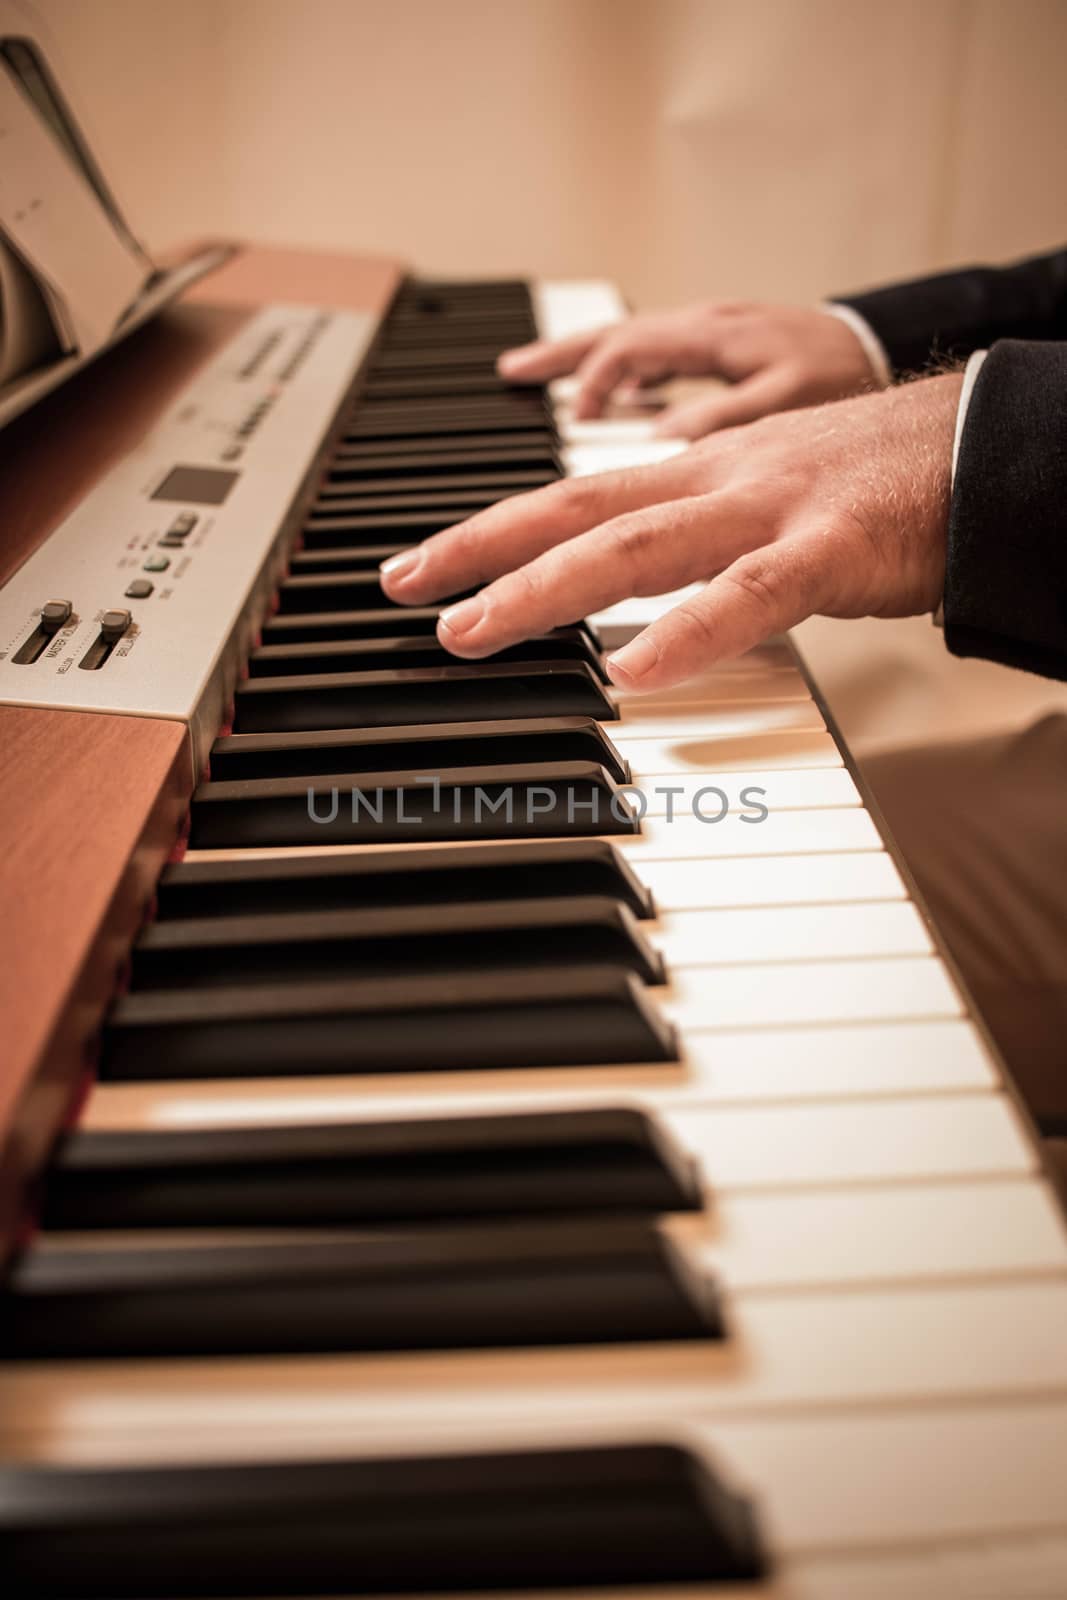 piano player finger keys pianist artist keyboard music by timwit